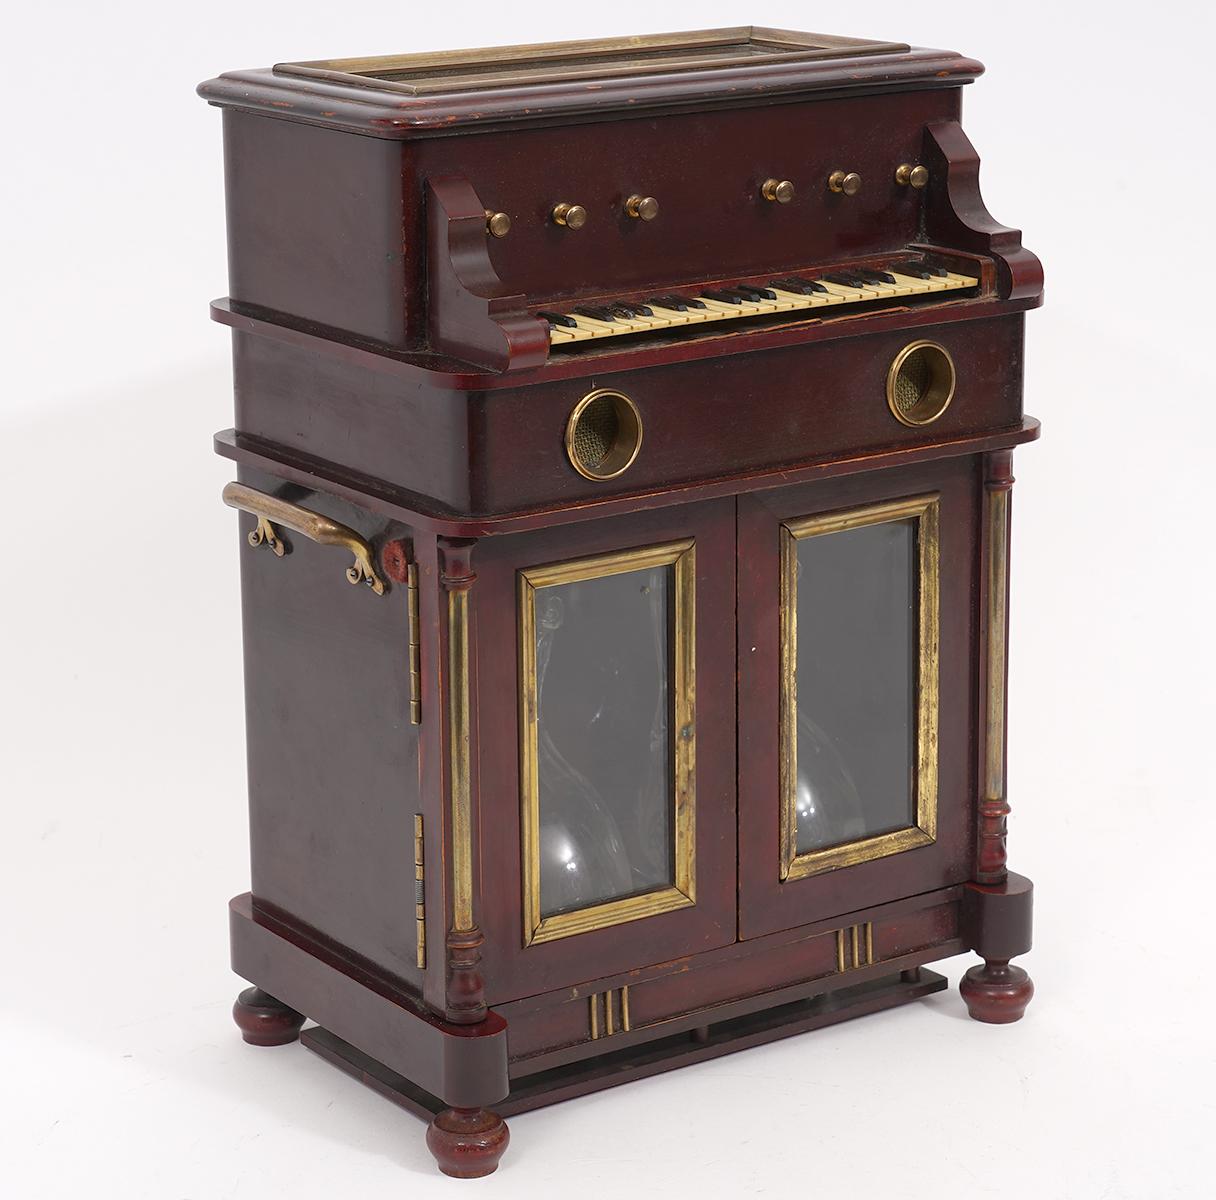 Regency French 19th Century Upright Piano Design Music Box Tantalus or 'Cave a Liqueur'